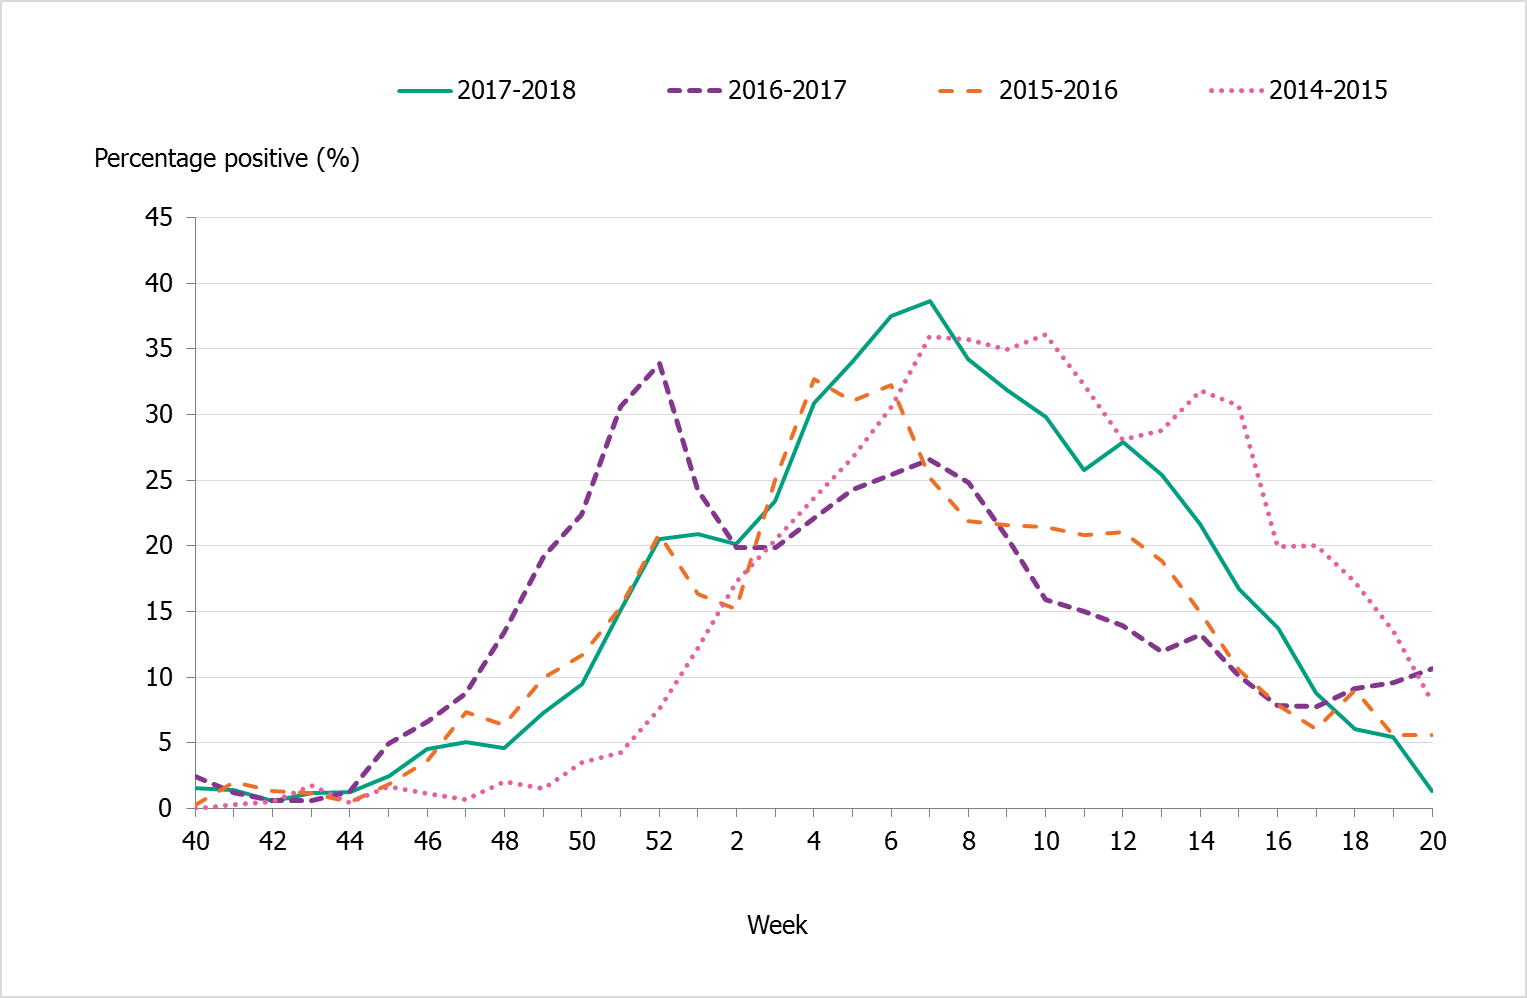 Percentage of samples testing positive for influenza, per week, 2014–2018. Peaks vary from about 33 to 37 percent. 